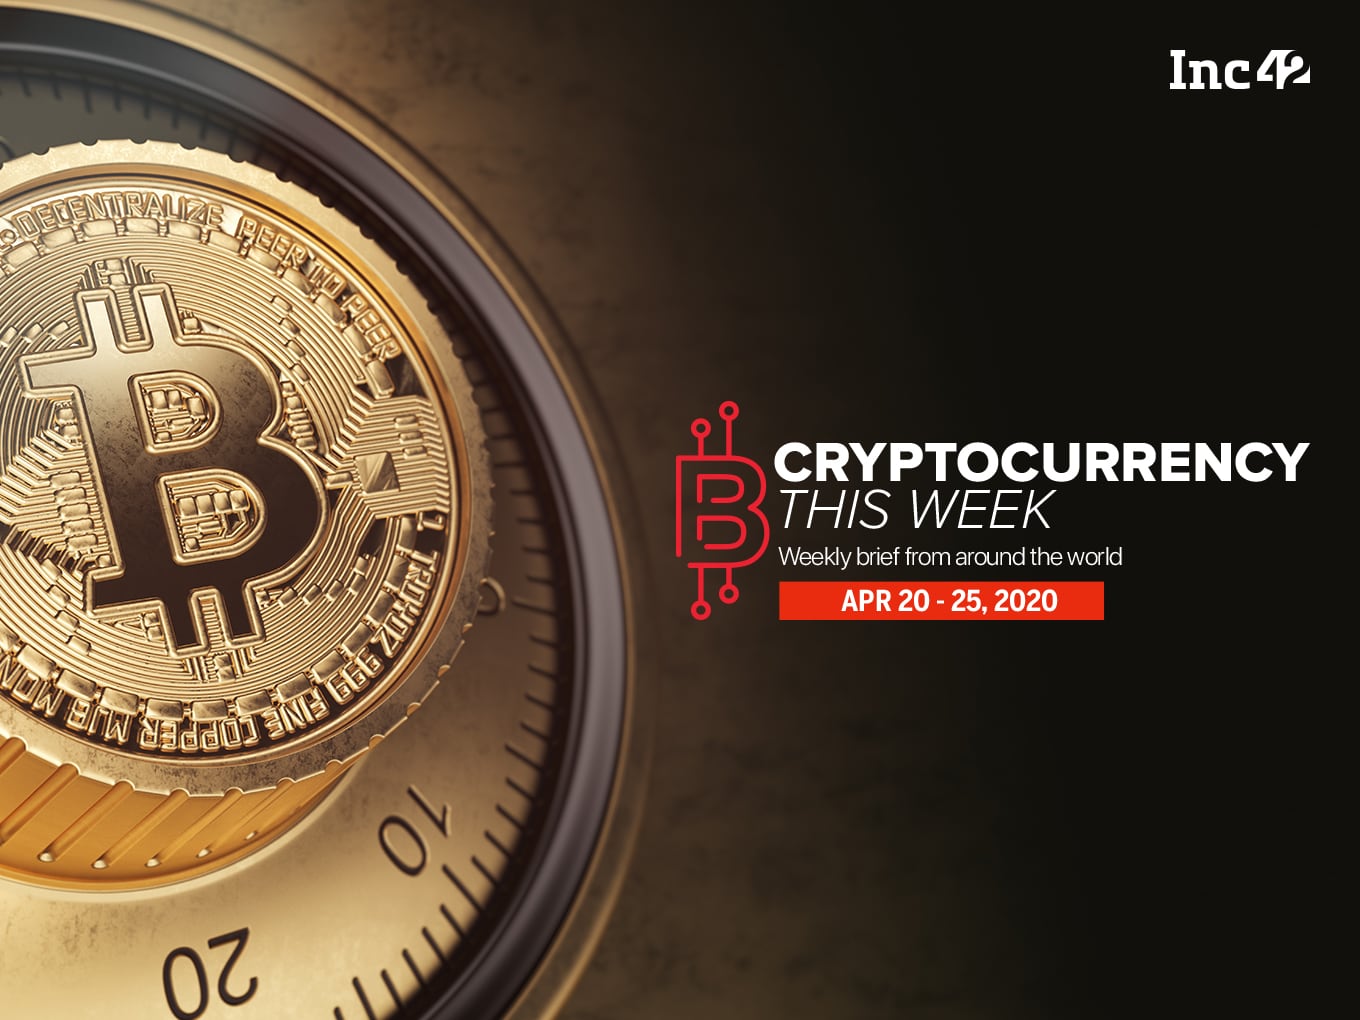 Cryptocurrency This Week: India On The Map For Bitcoin Sextortion, China To Launch World’s First Official Cryptocurrency & More